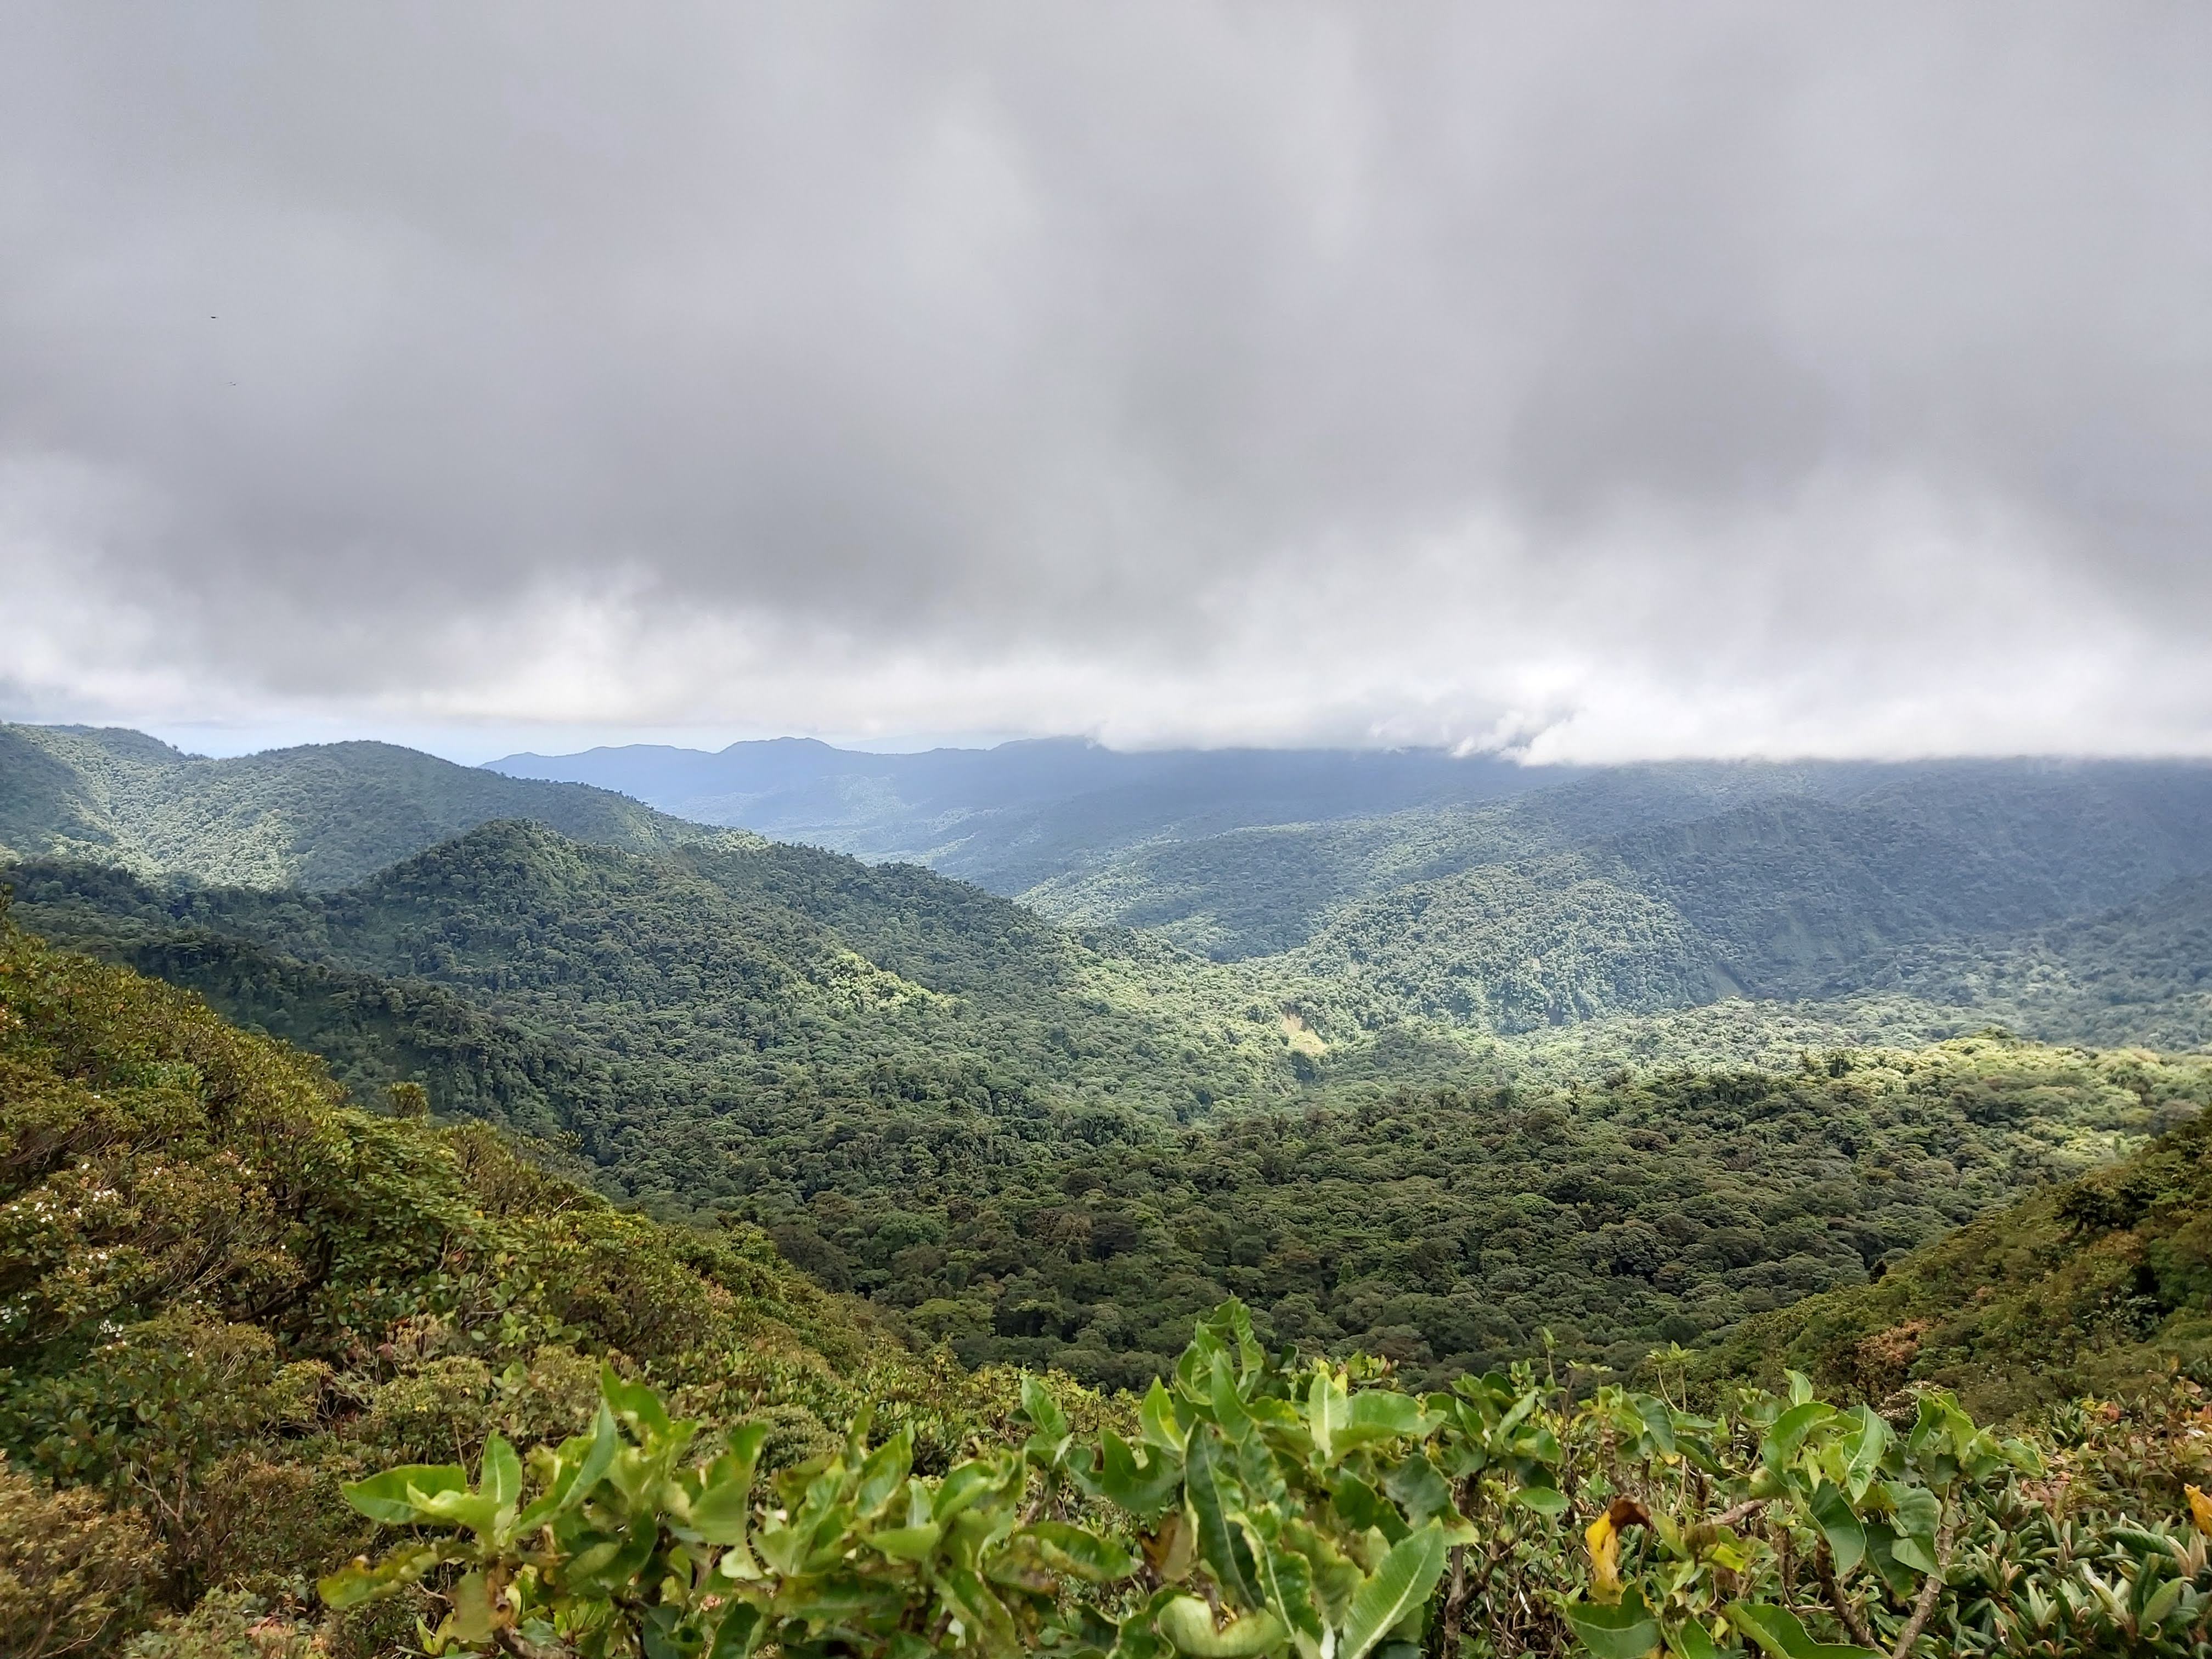 The Cloud Forest of Costa Rica